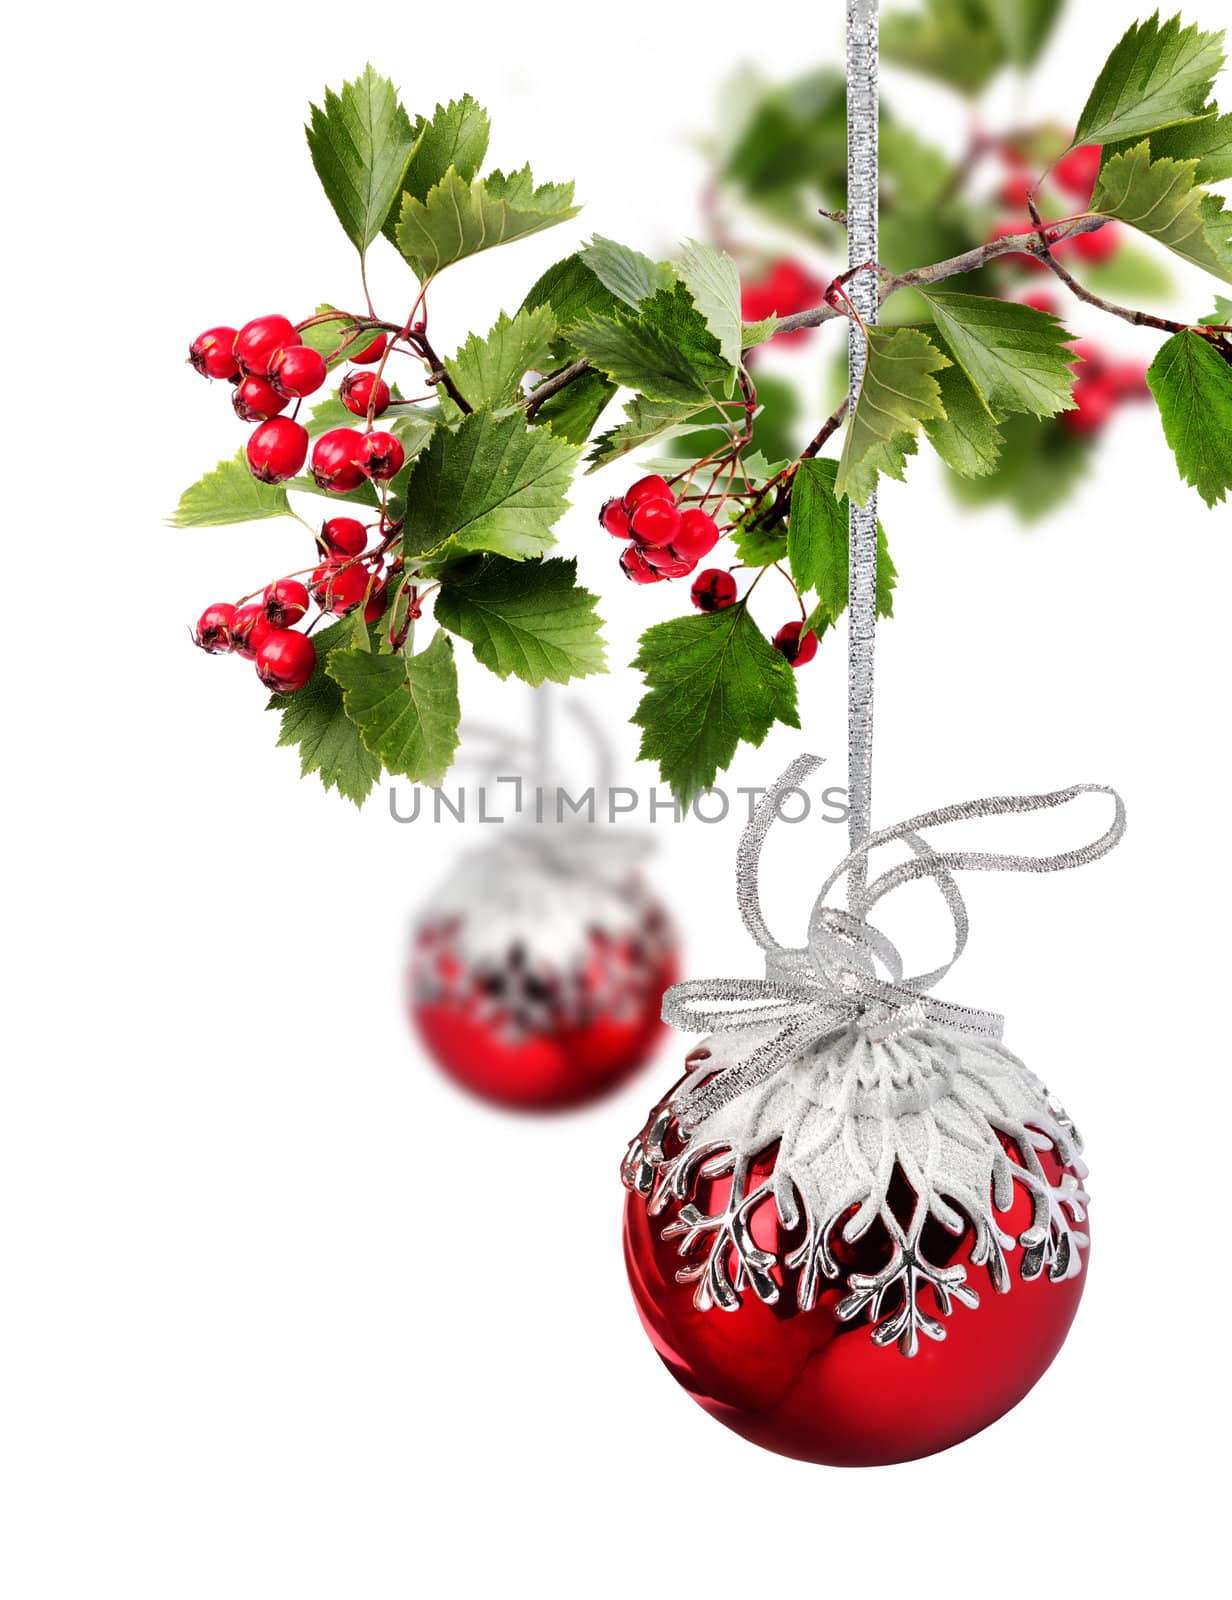 Red Christmas balls with hawthorn berries branch, isolated on white